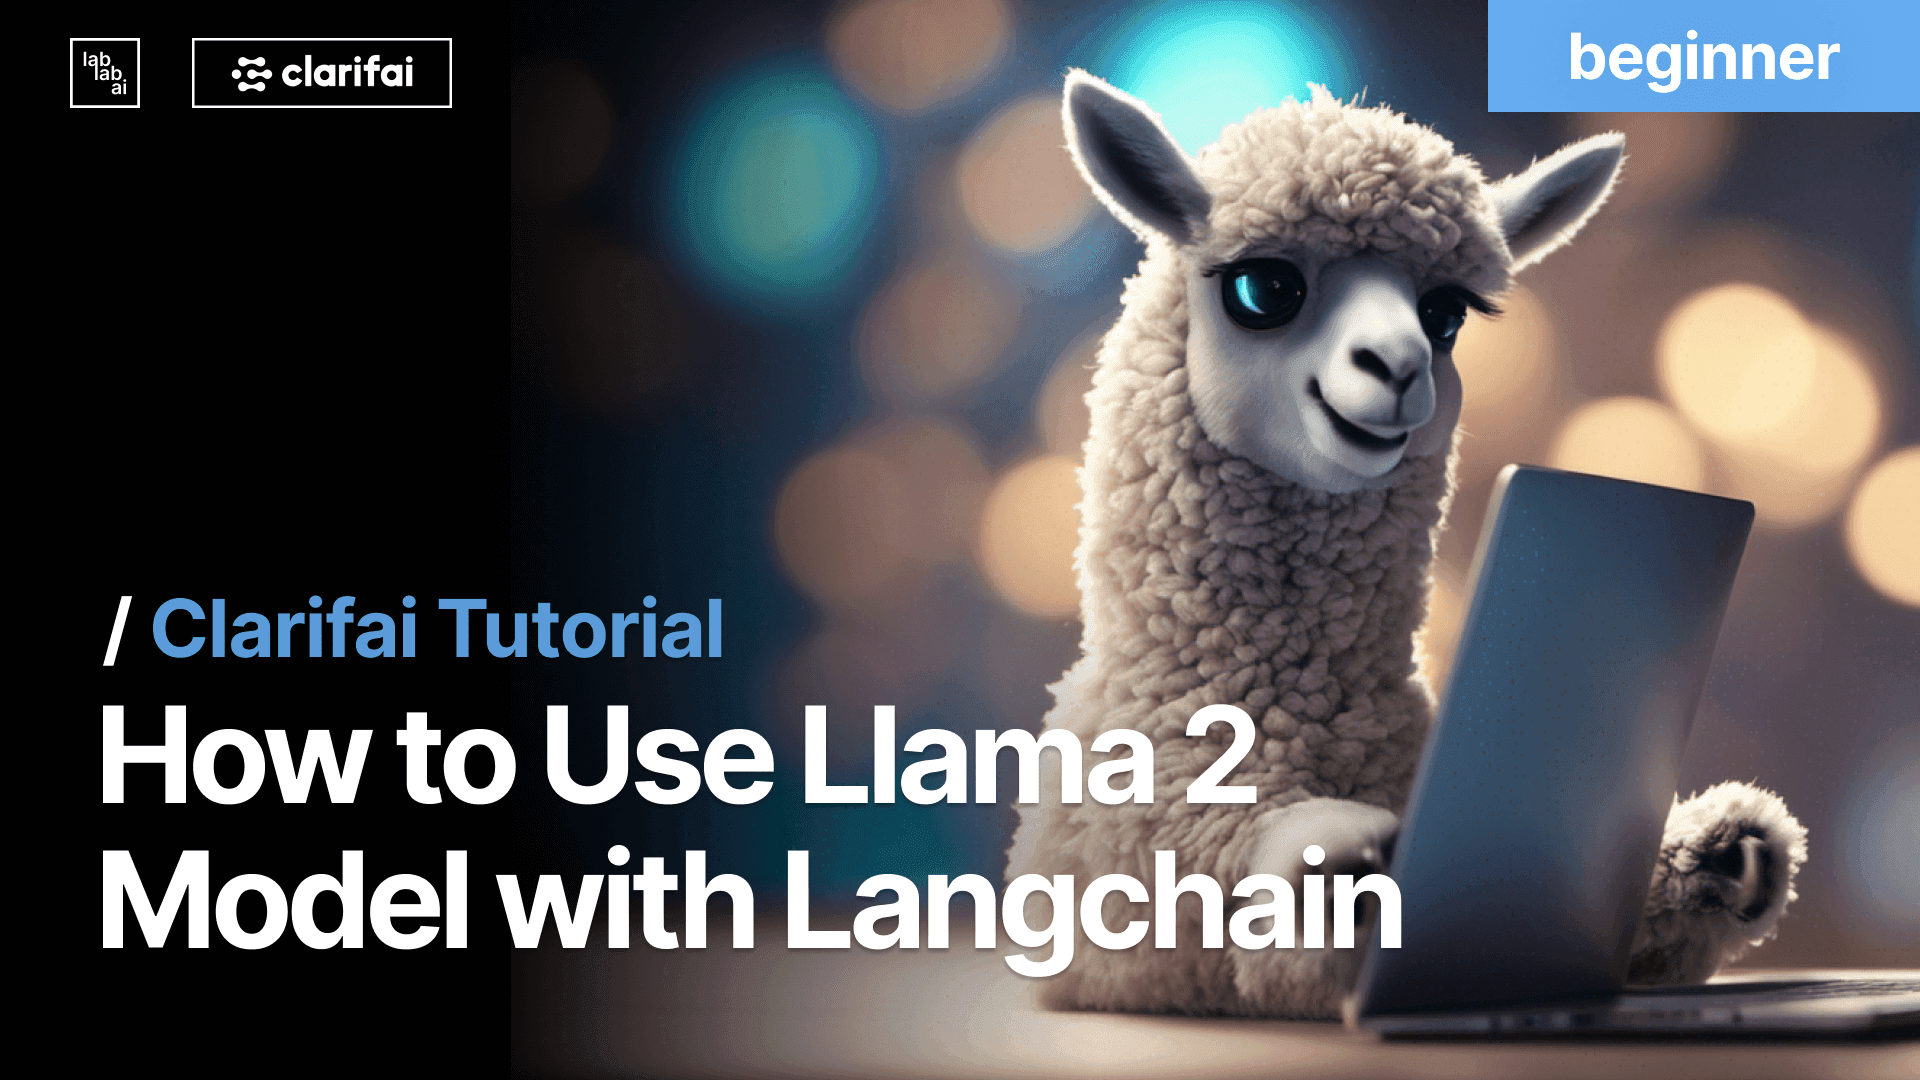 How to Use Llama 2 Model with Langchain on Clarifai